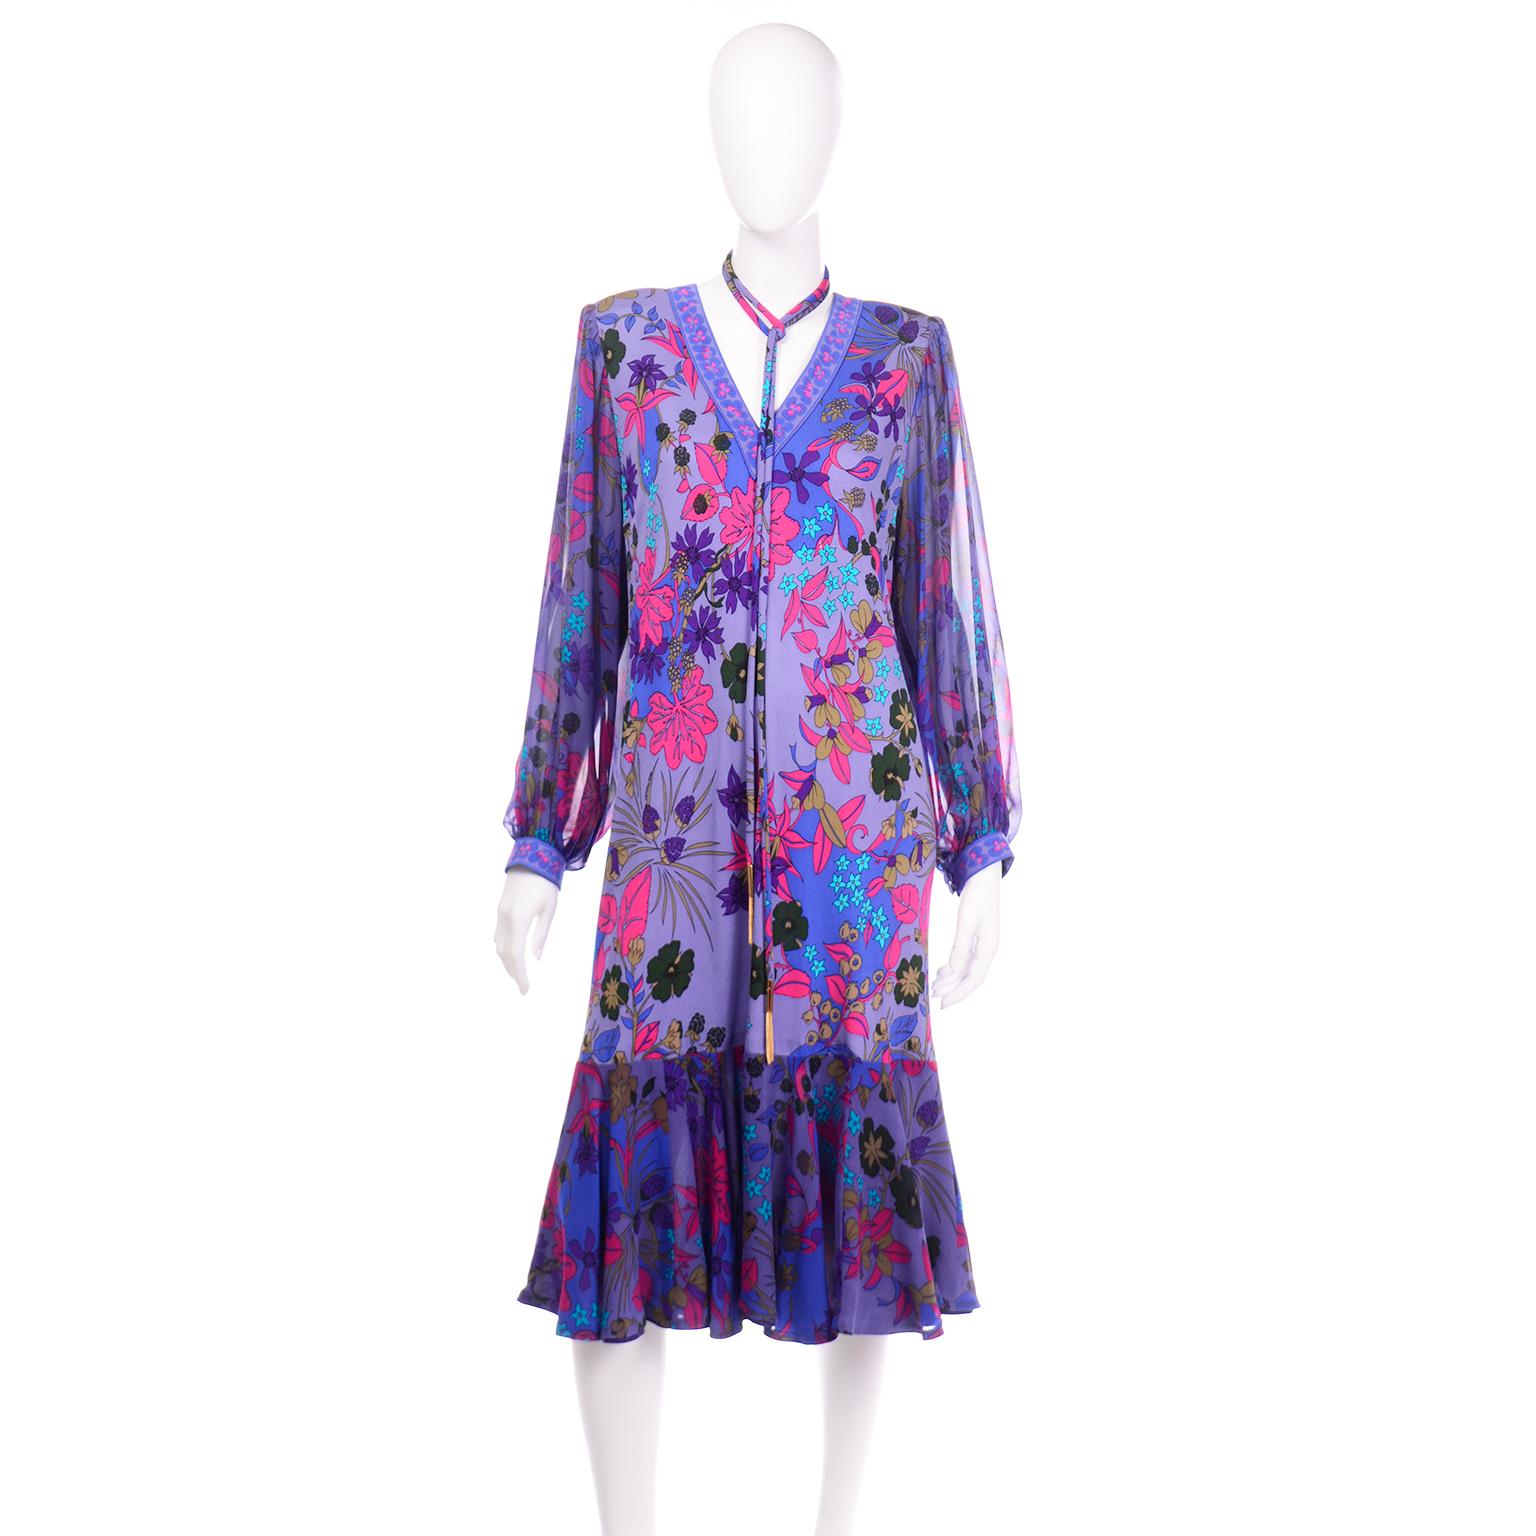 This beautiful vintage 100% silk Averardo Bessi dress is in a printed silk jersey in shades of violet purple, green, olive, magenta, blue, and teal. There is a metal zipper down the center back seam with a hook-and-eye for closure, The shoulders are